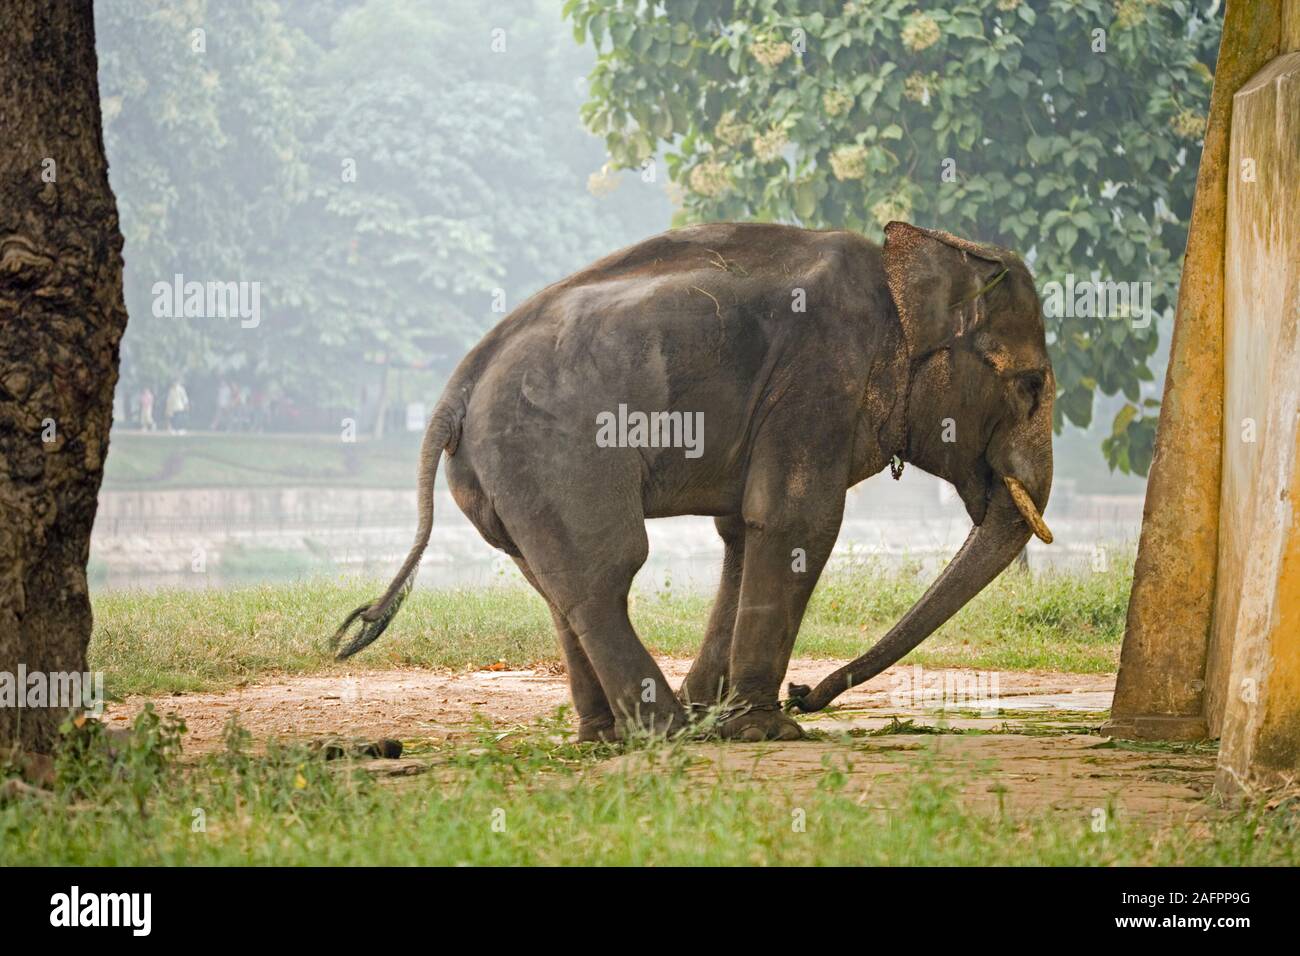 ASIAN ELEPHANT (Elephas maximus). Captive, chain tethered animal,   steriotypic head and trunk weaving behaviour. Starved of environmental enrichment. Stock Photo